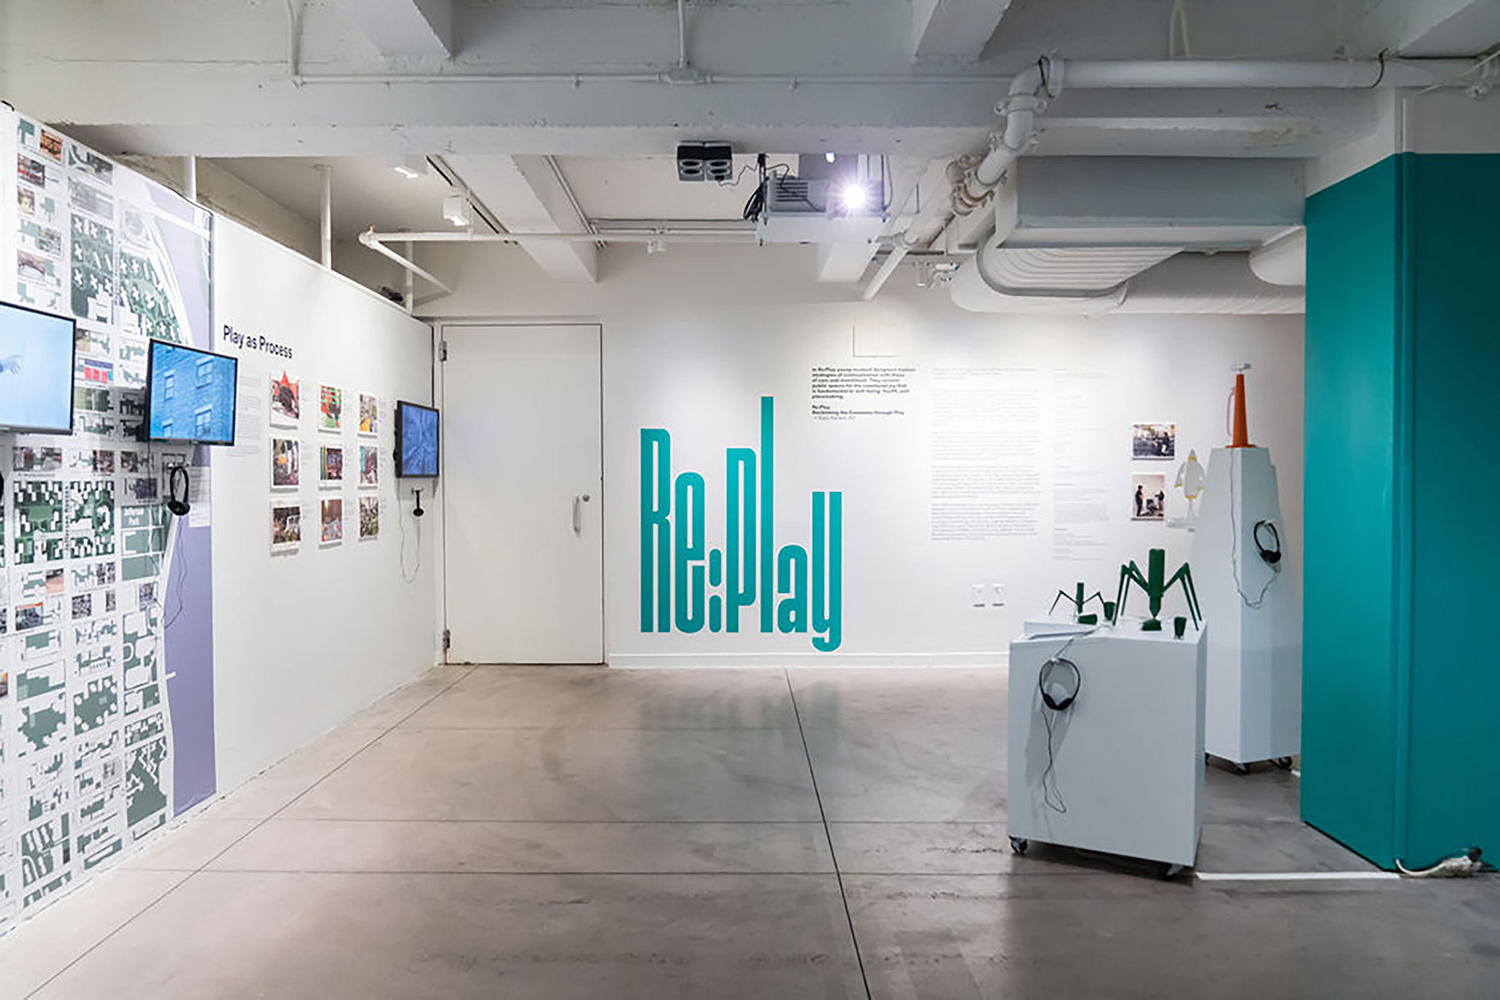 Installation view with two screens on the left wall and 3D printed models on white square bases on the right